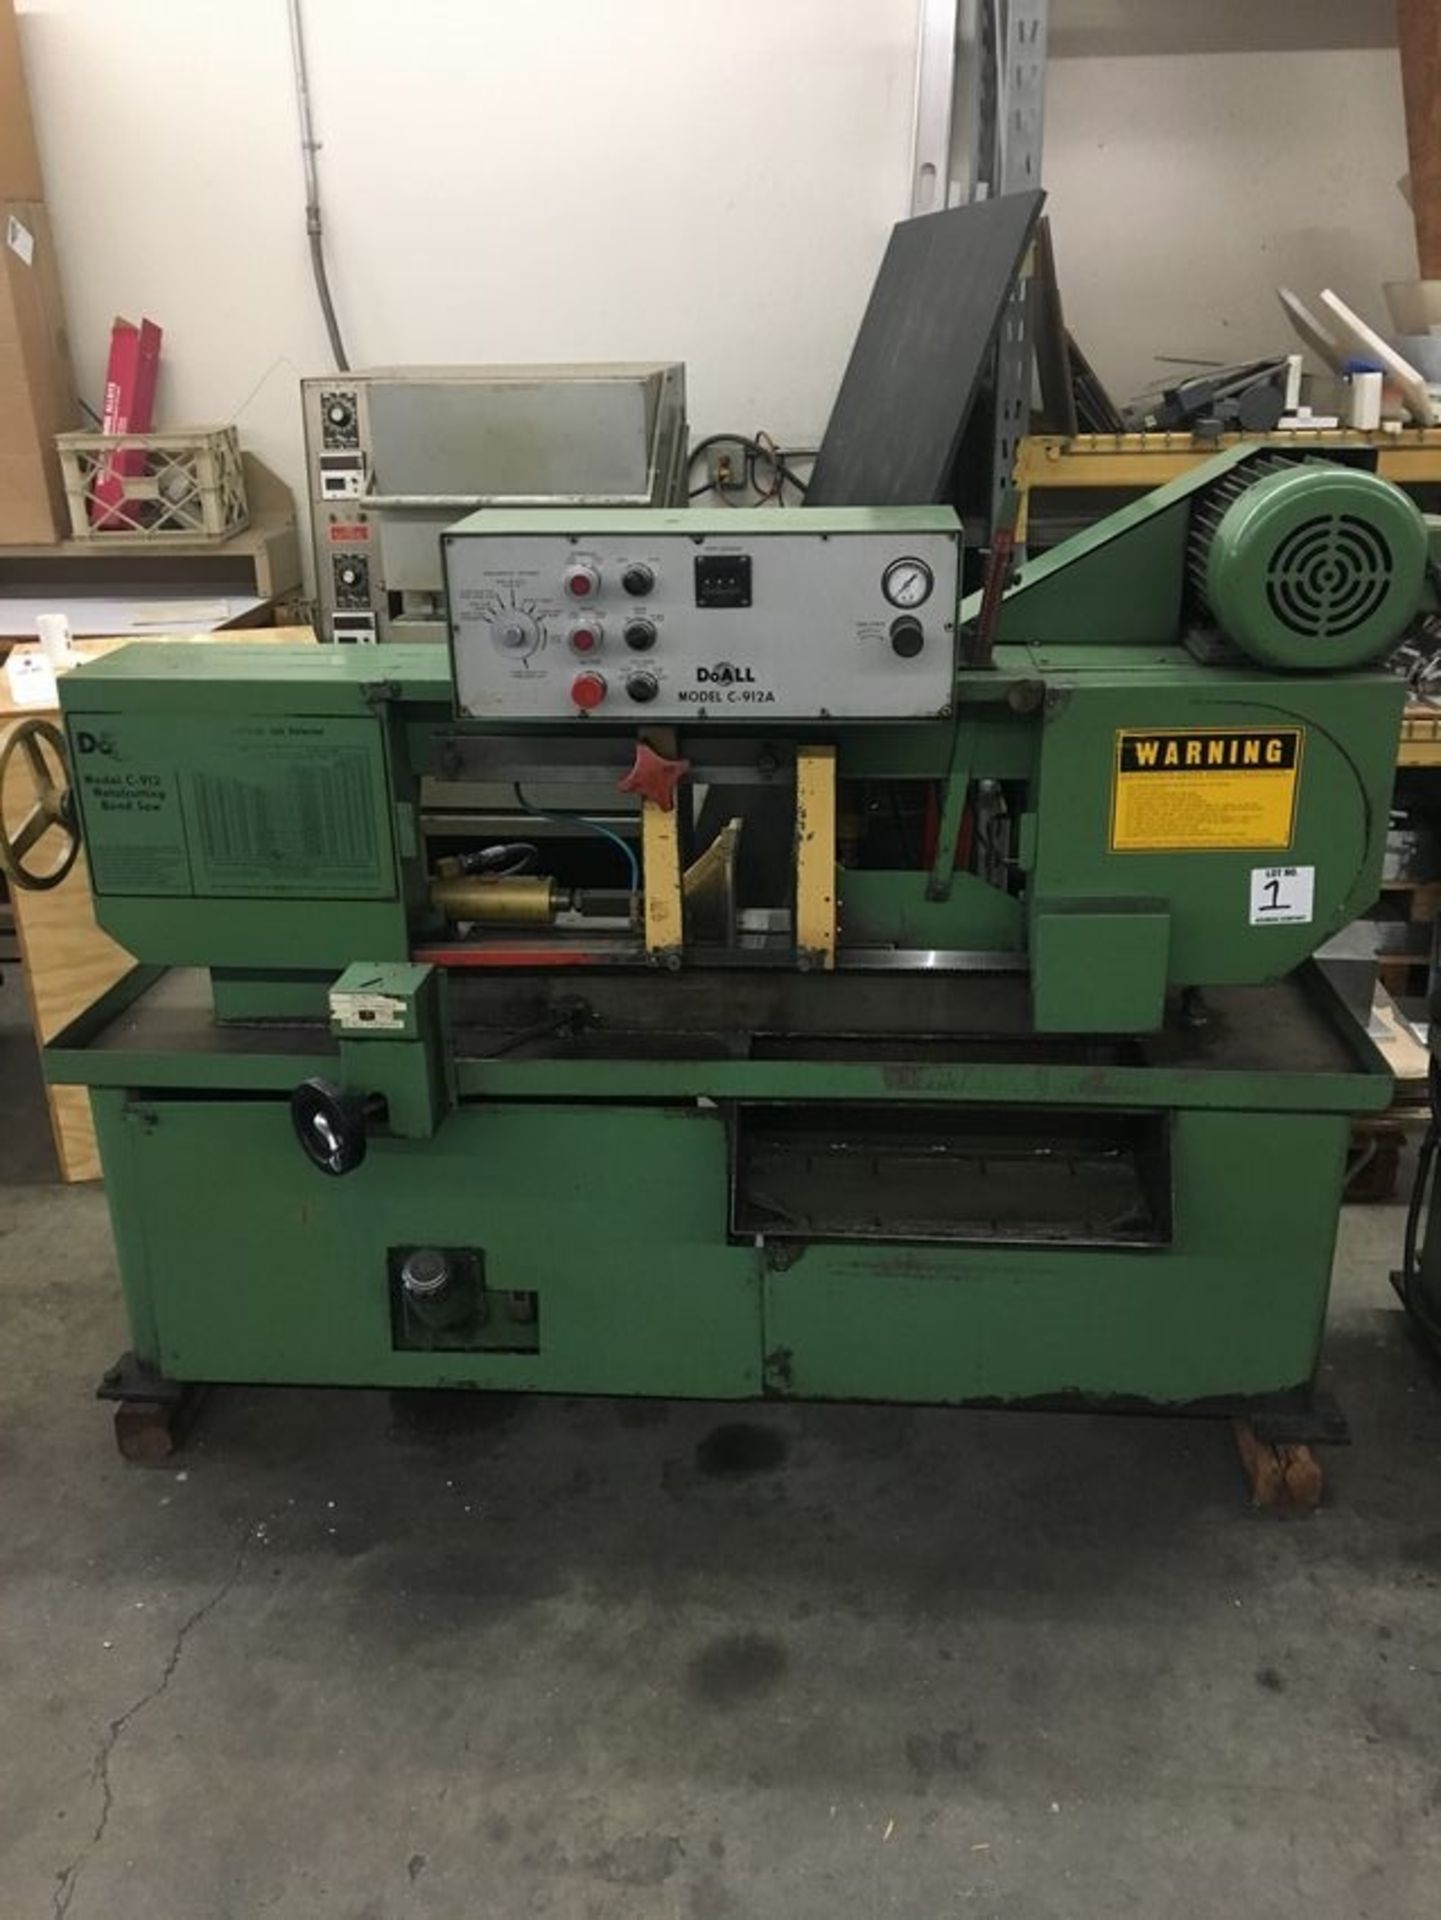 1985 do all c-912A automatic bandsaw -9” H x 12” 1” x ,146-148” blade size, 60-360 FPM Blade - Image 2 of 4